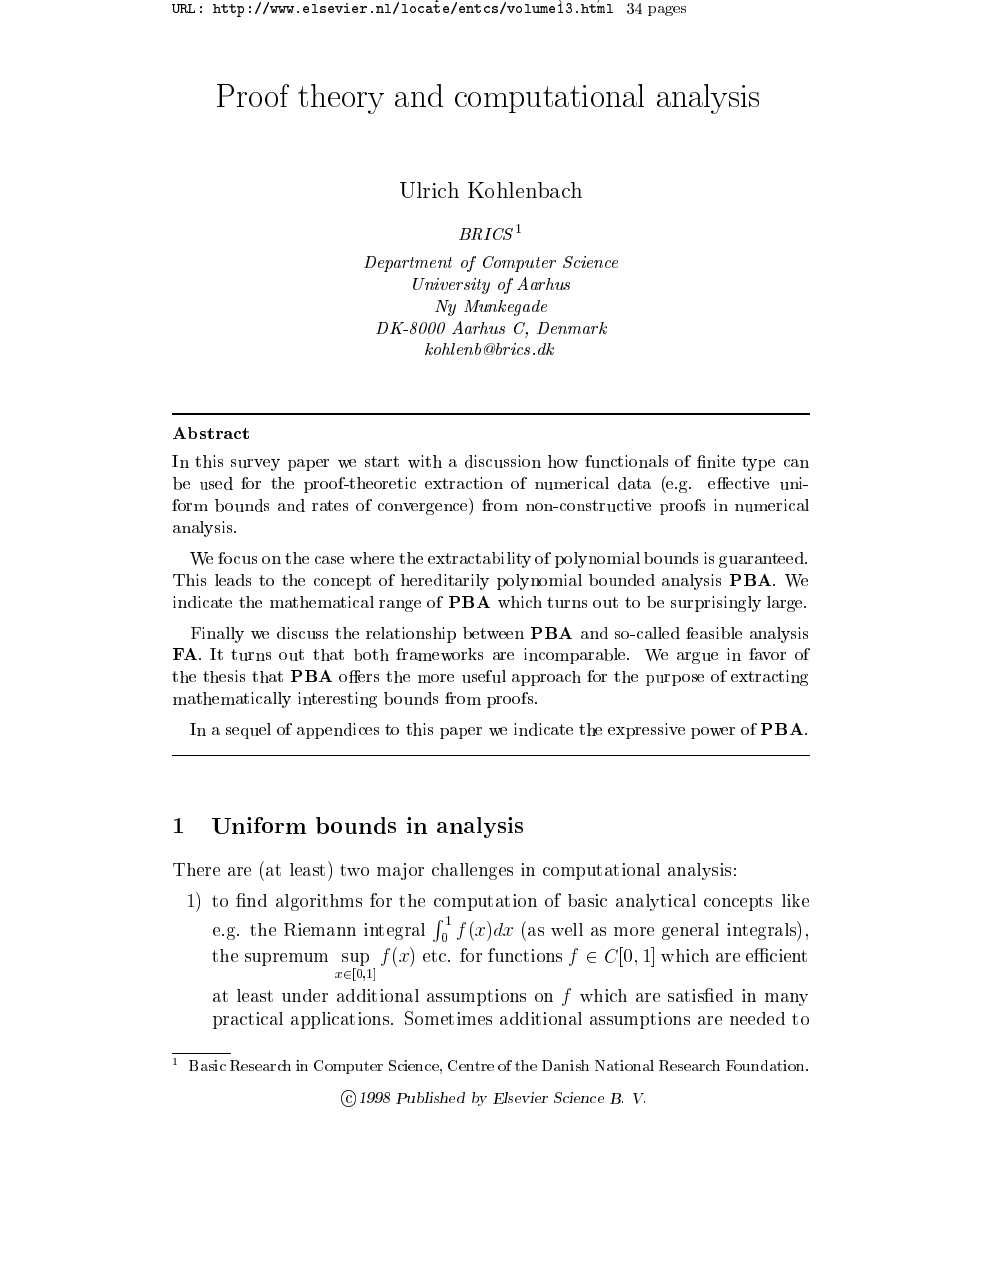 Proof Theory And Computational Analysis Topic Of Research Paper In Mathematics Download Scholarly Article Pdf And Read For Free On Cyberleninka Open Science Hub